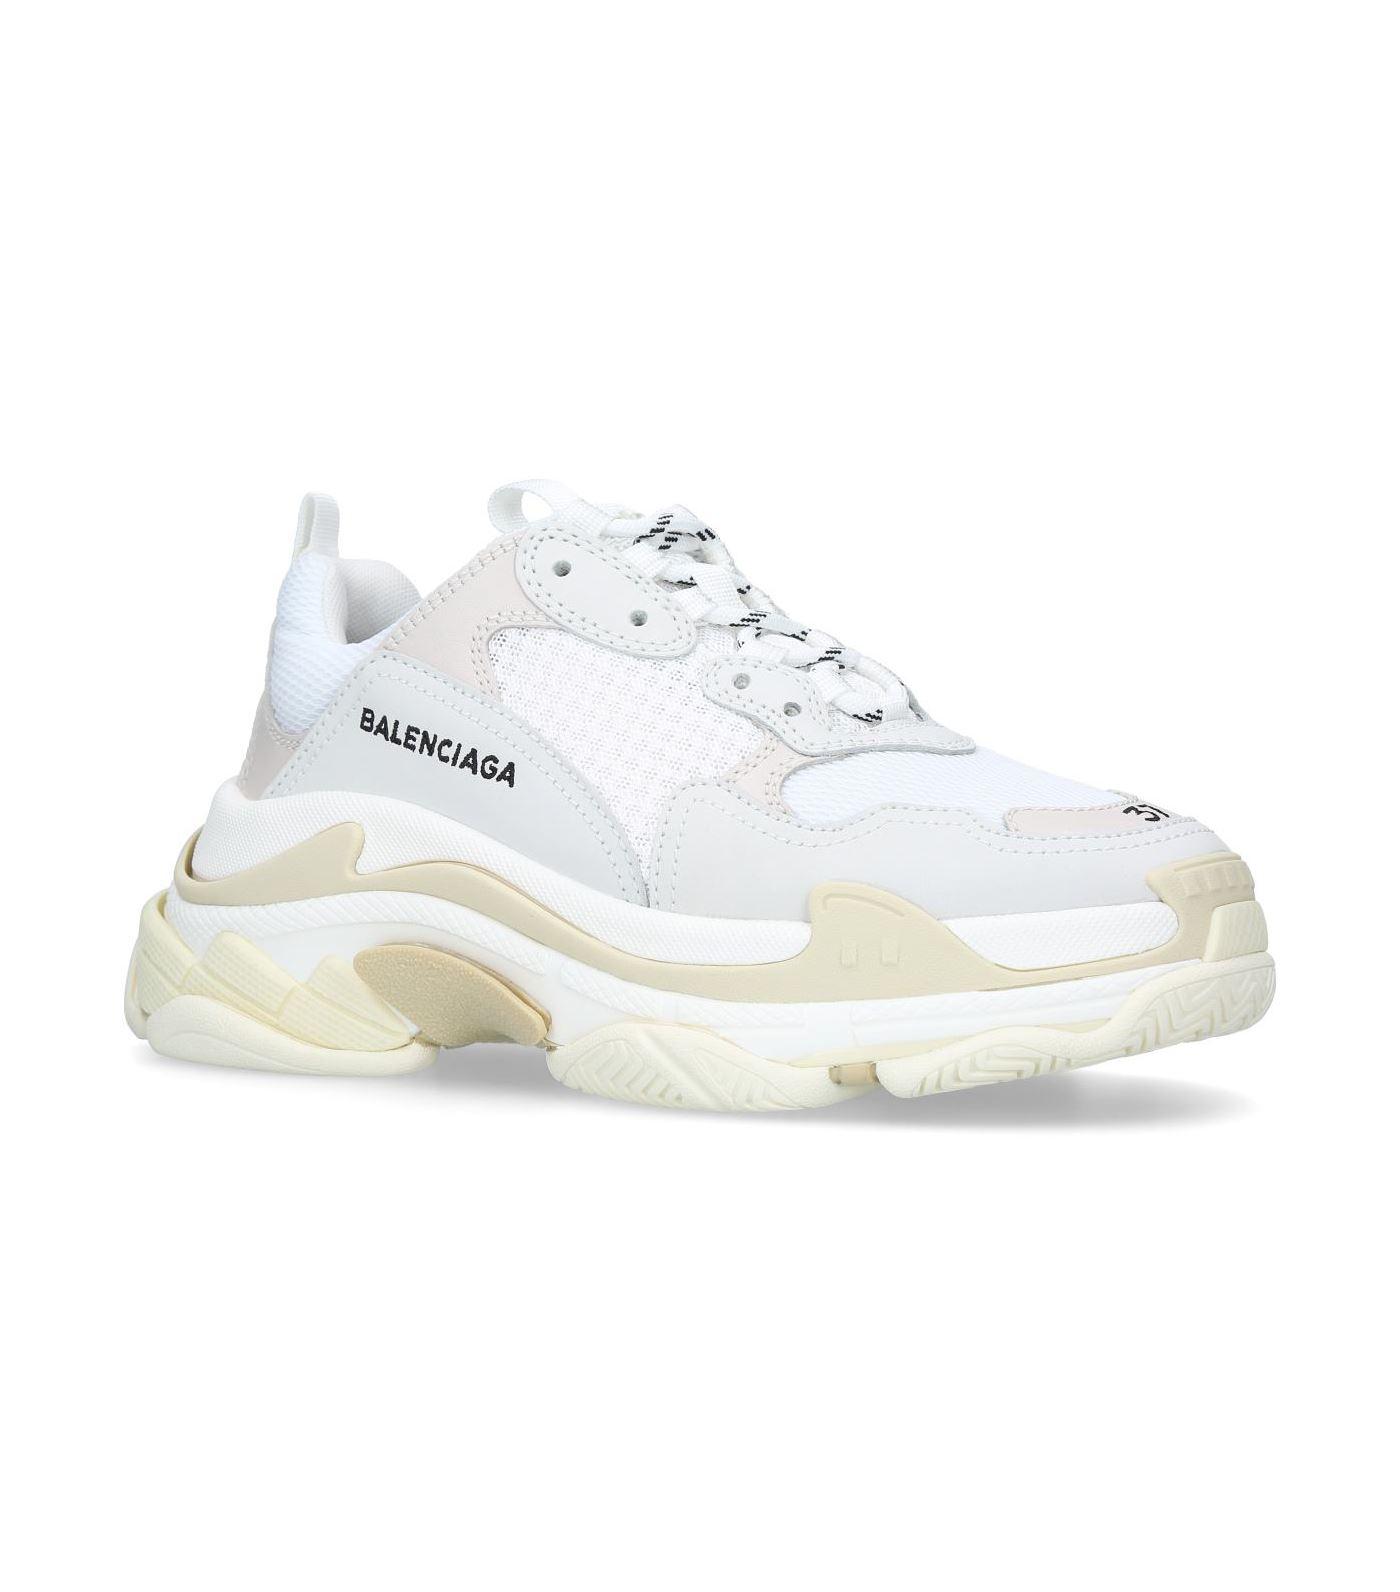 Balenciaga Lace Triple S Trainers in White - Save 20% - Lyst